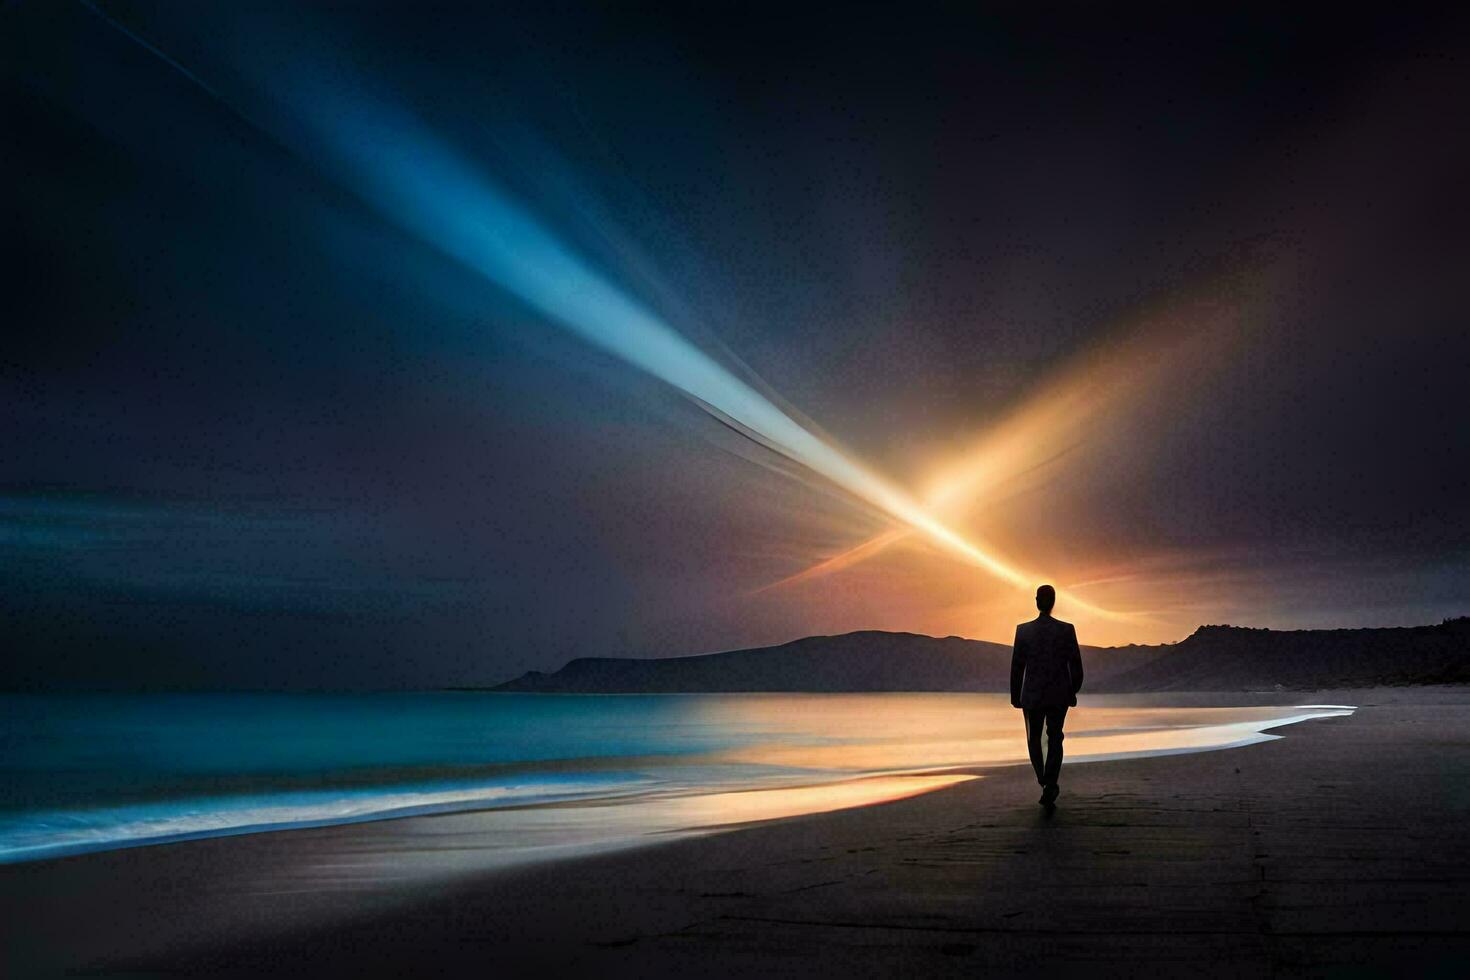 Man Standing in Blue Light · Free Stock Photo